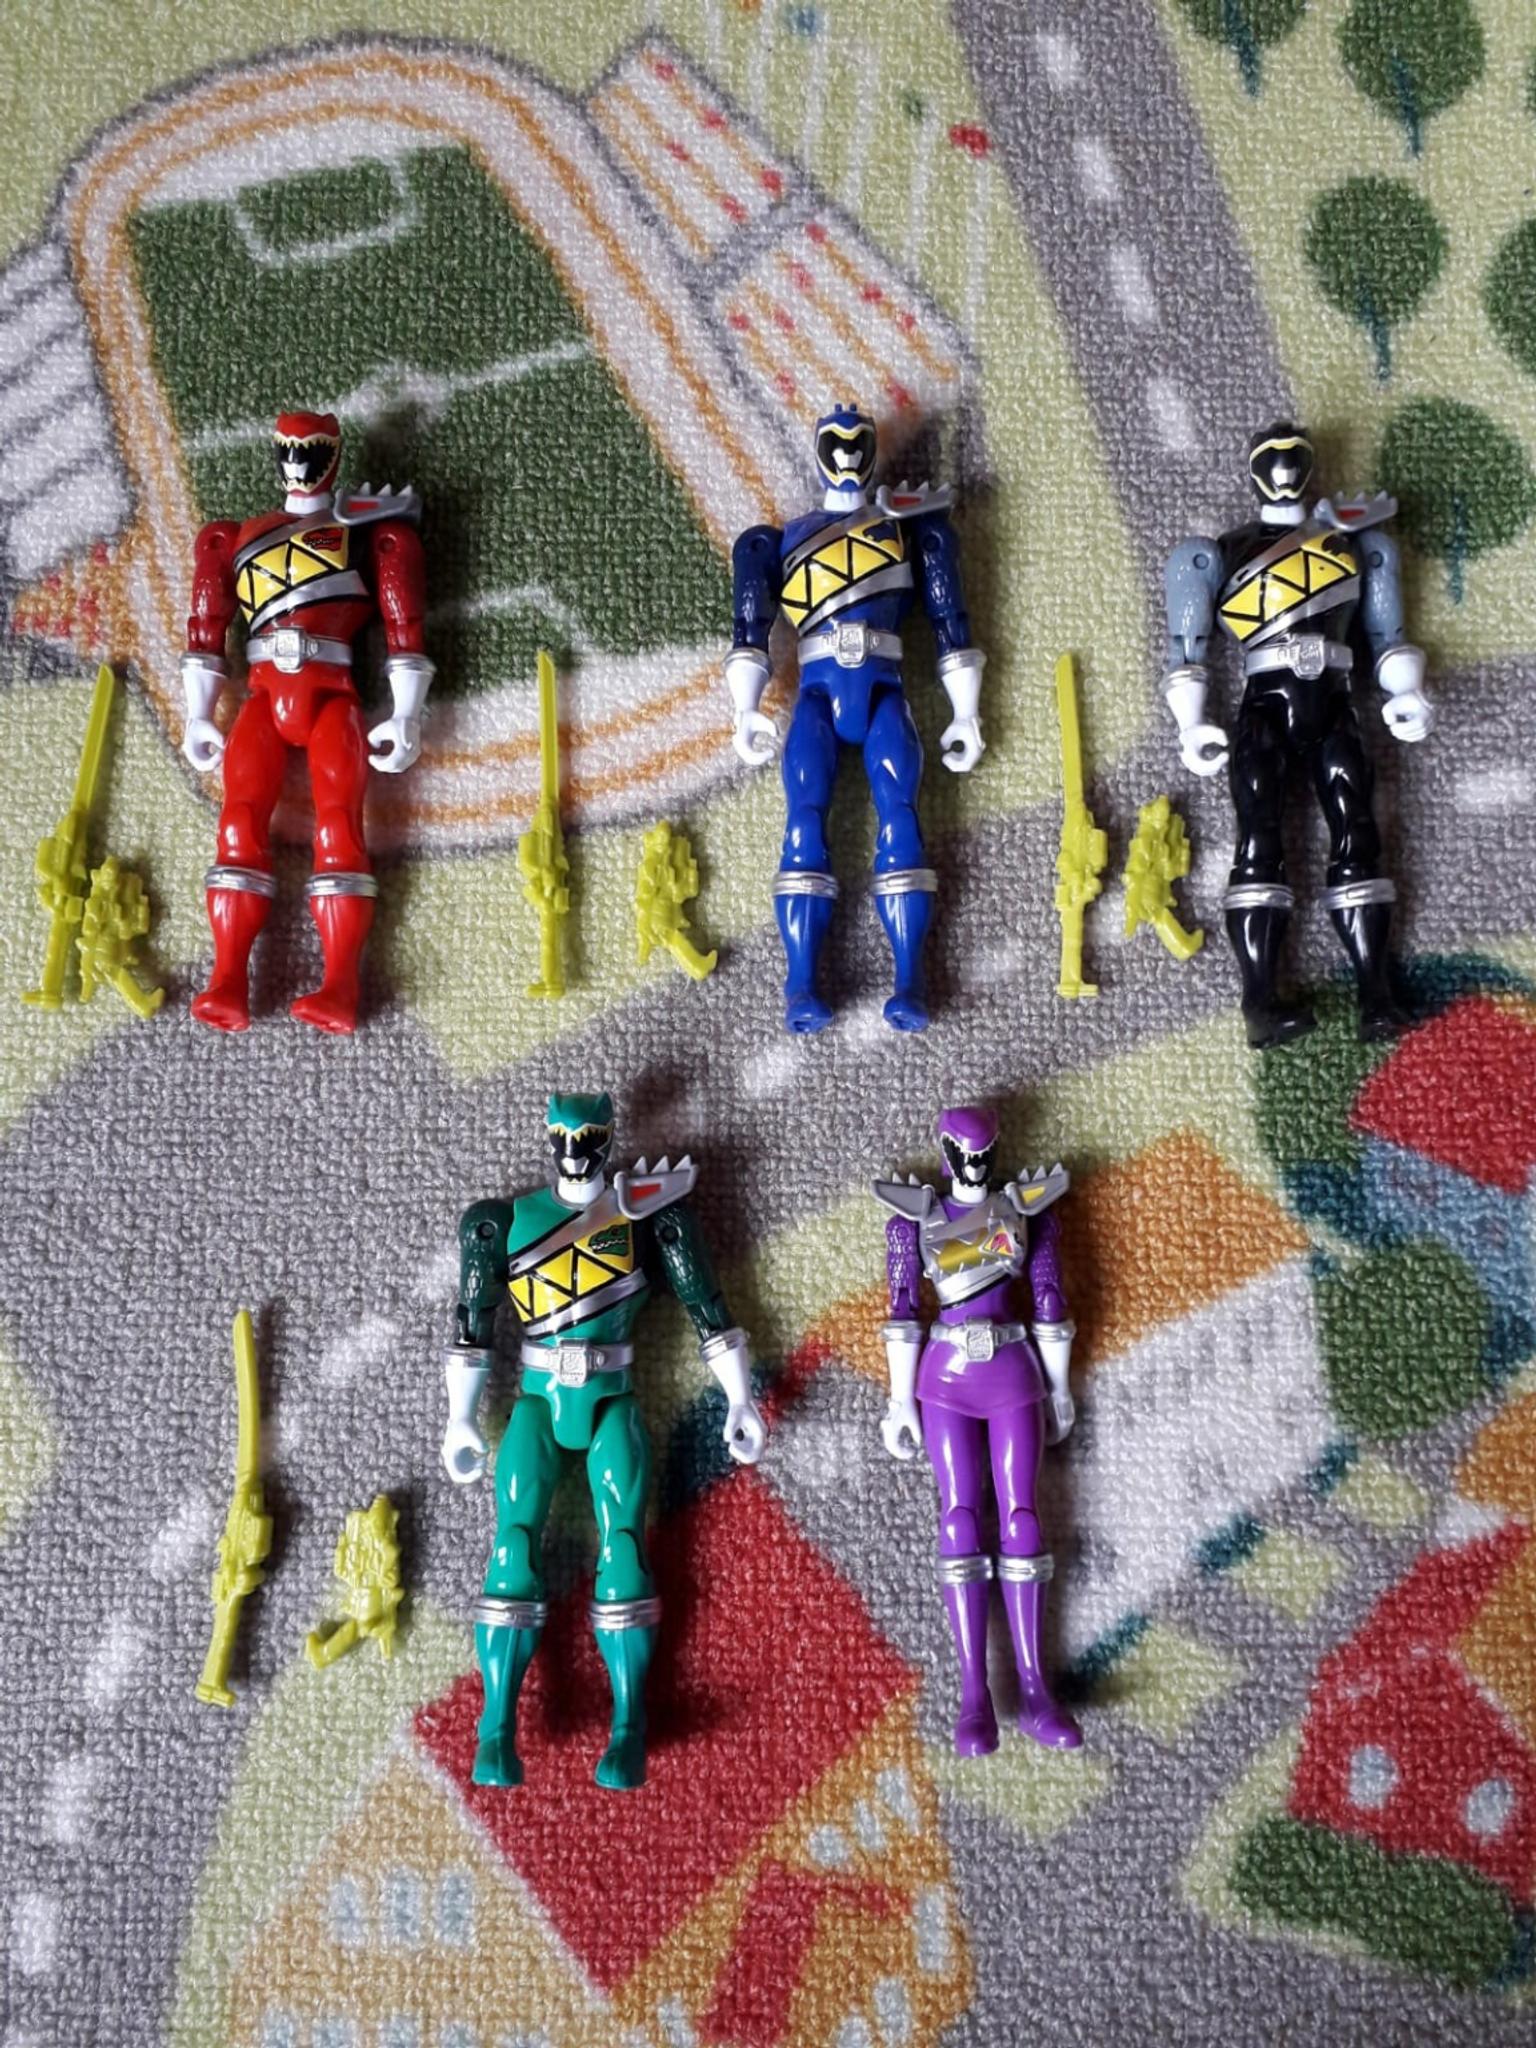 power rangers dino charge action figure set